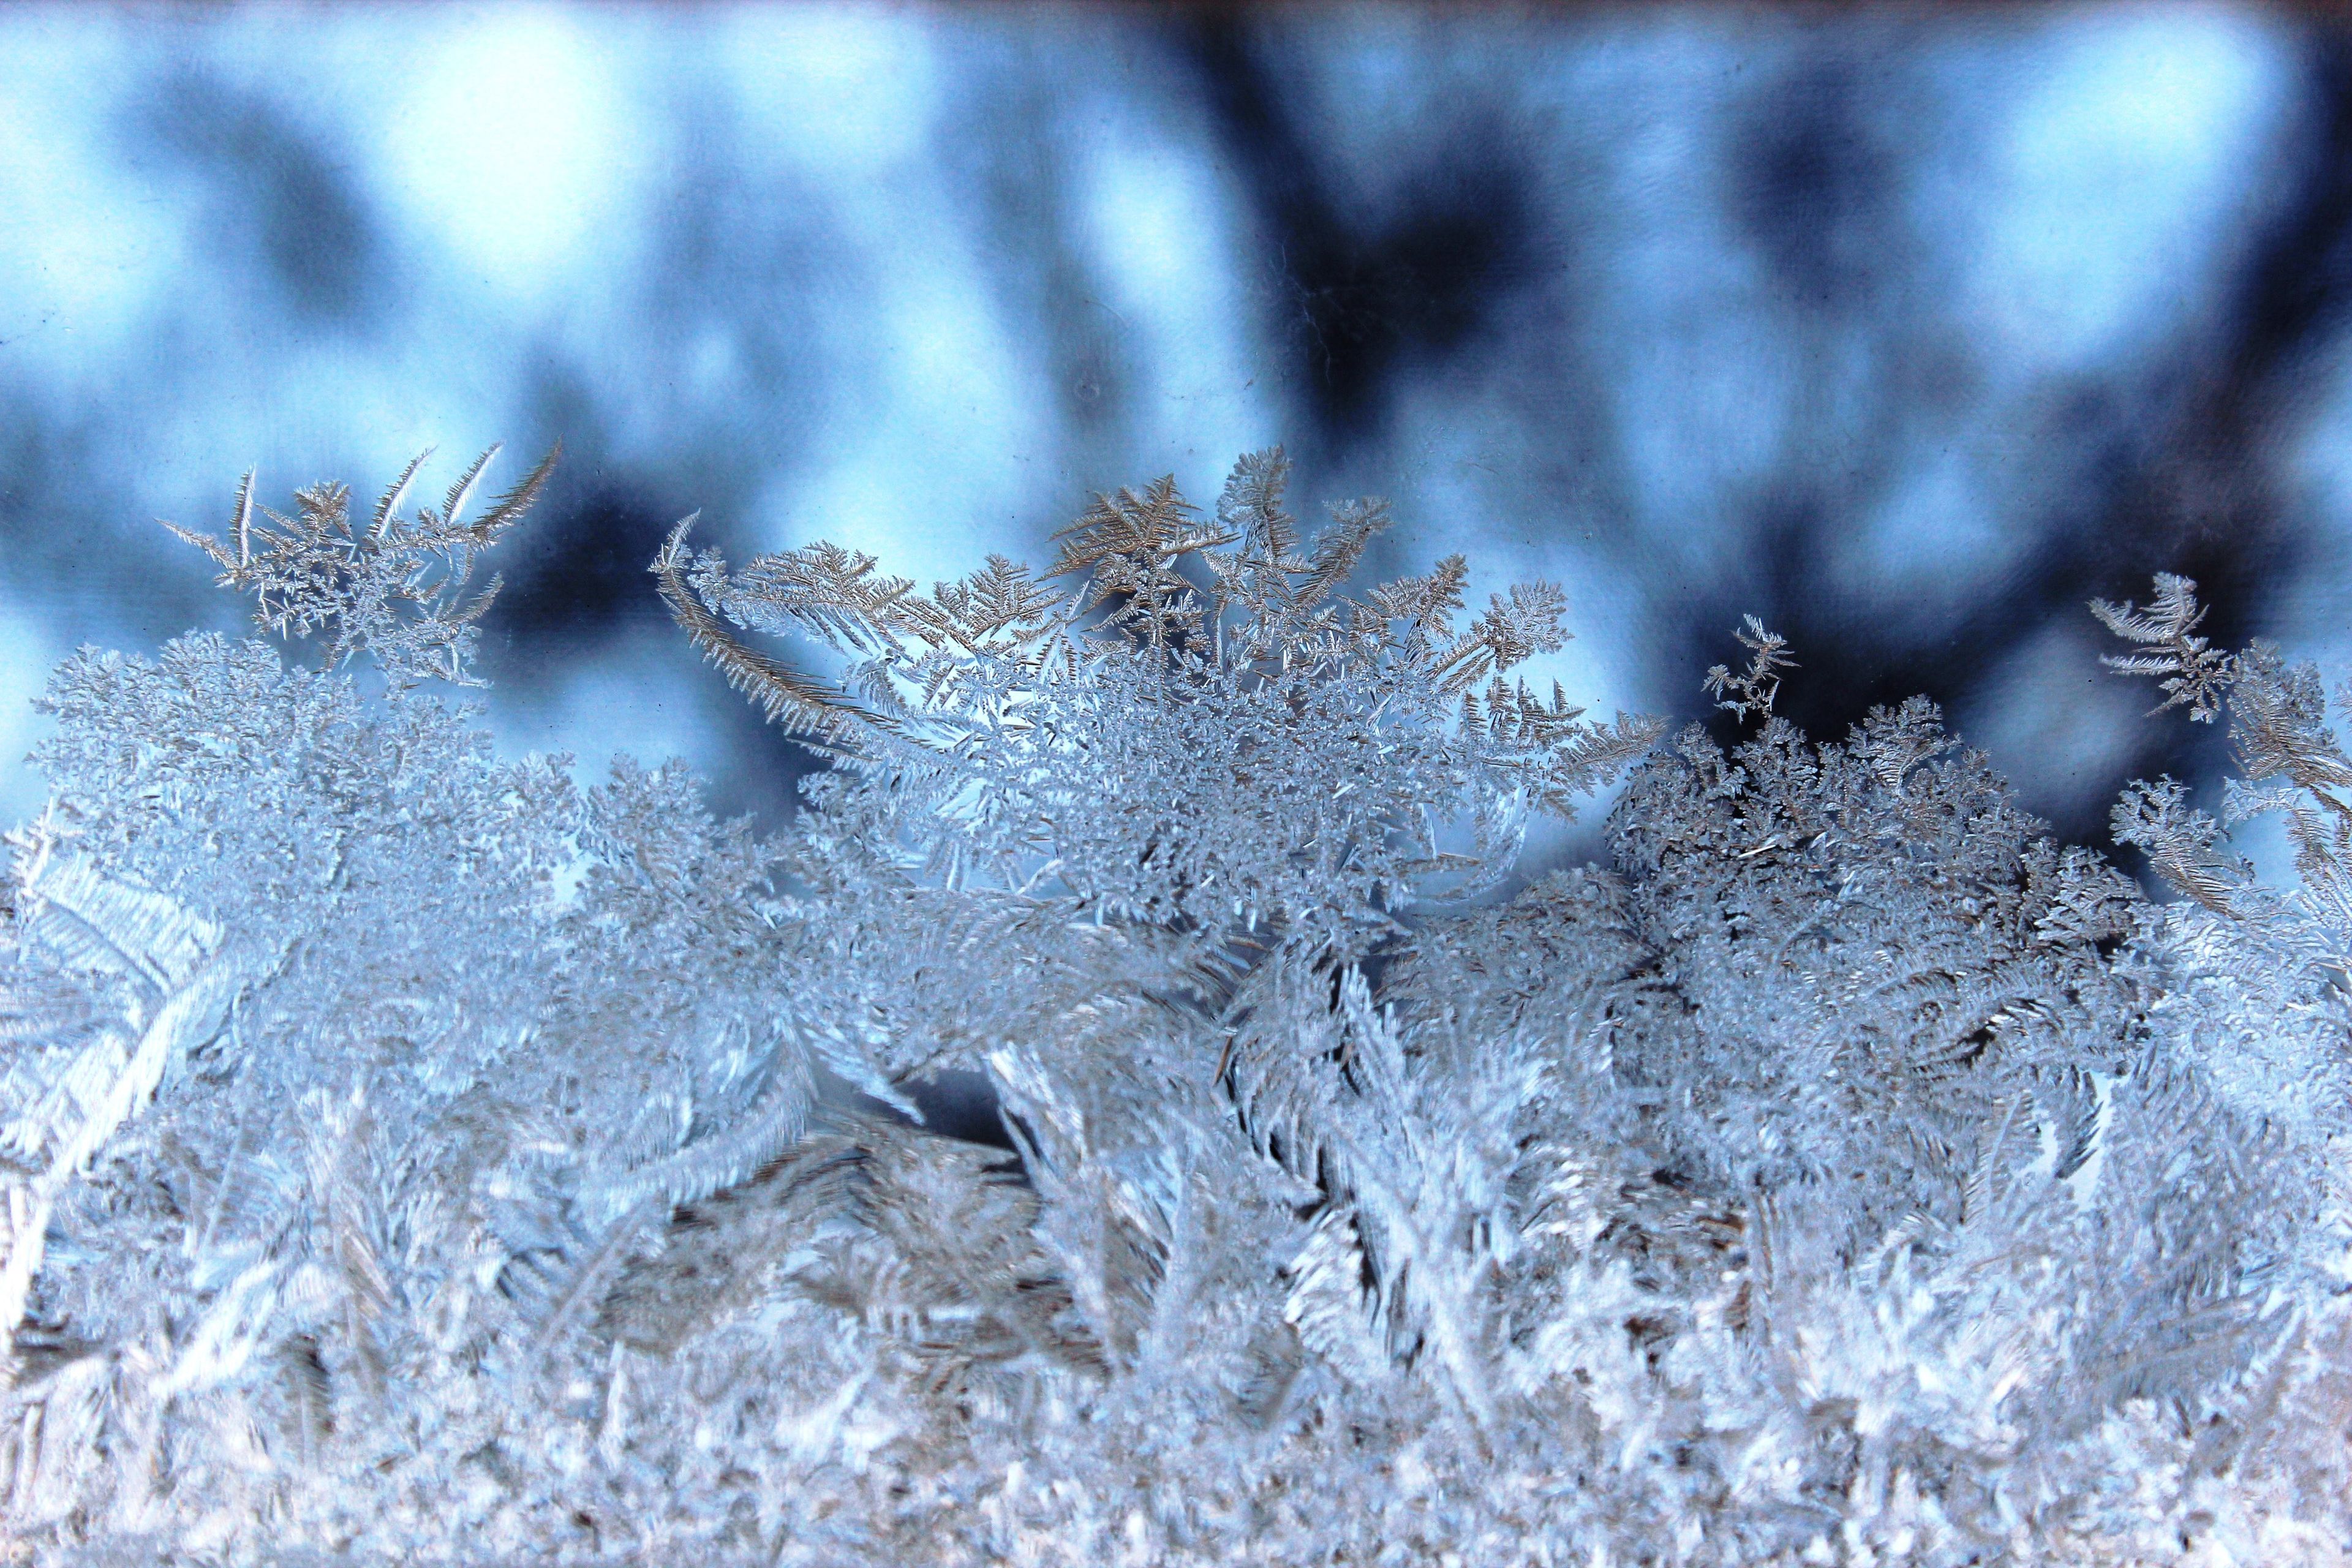 A close-up of small icicles.